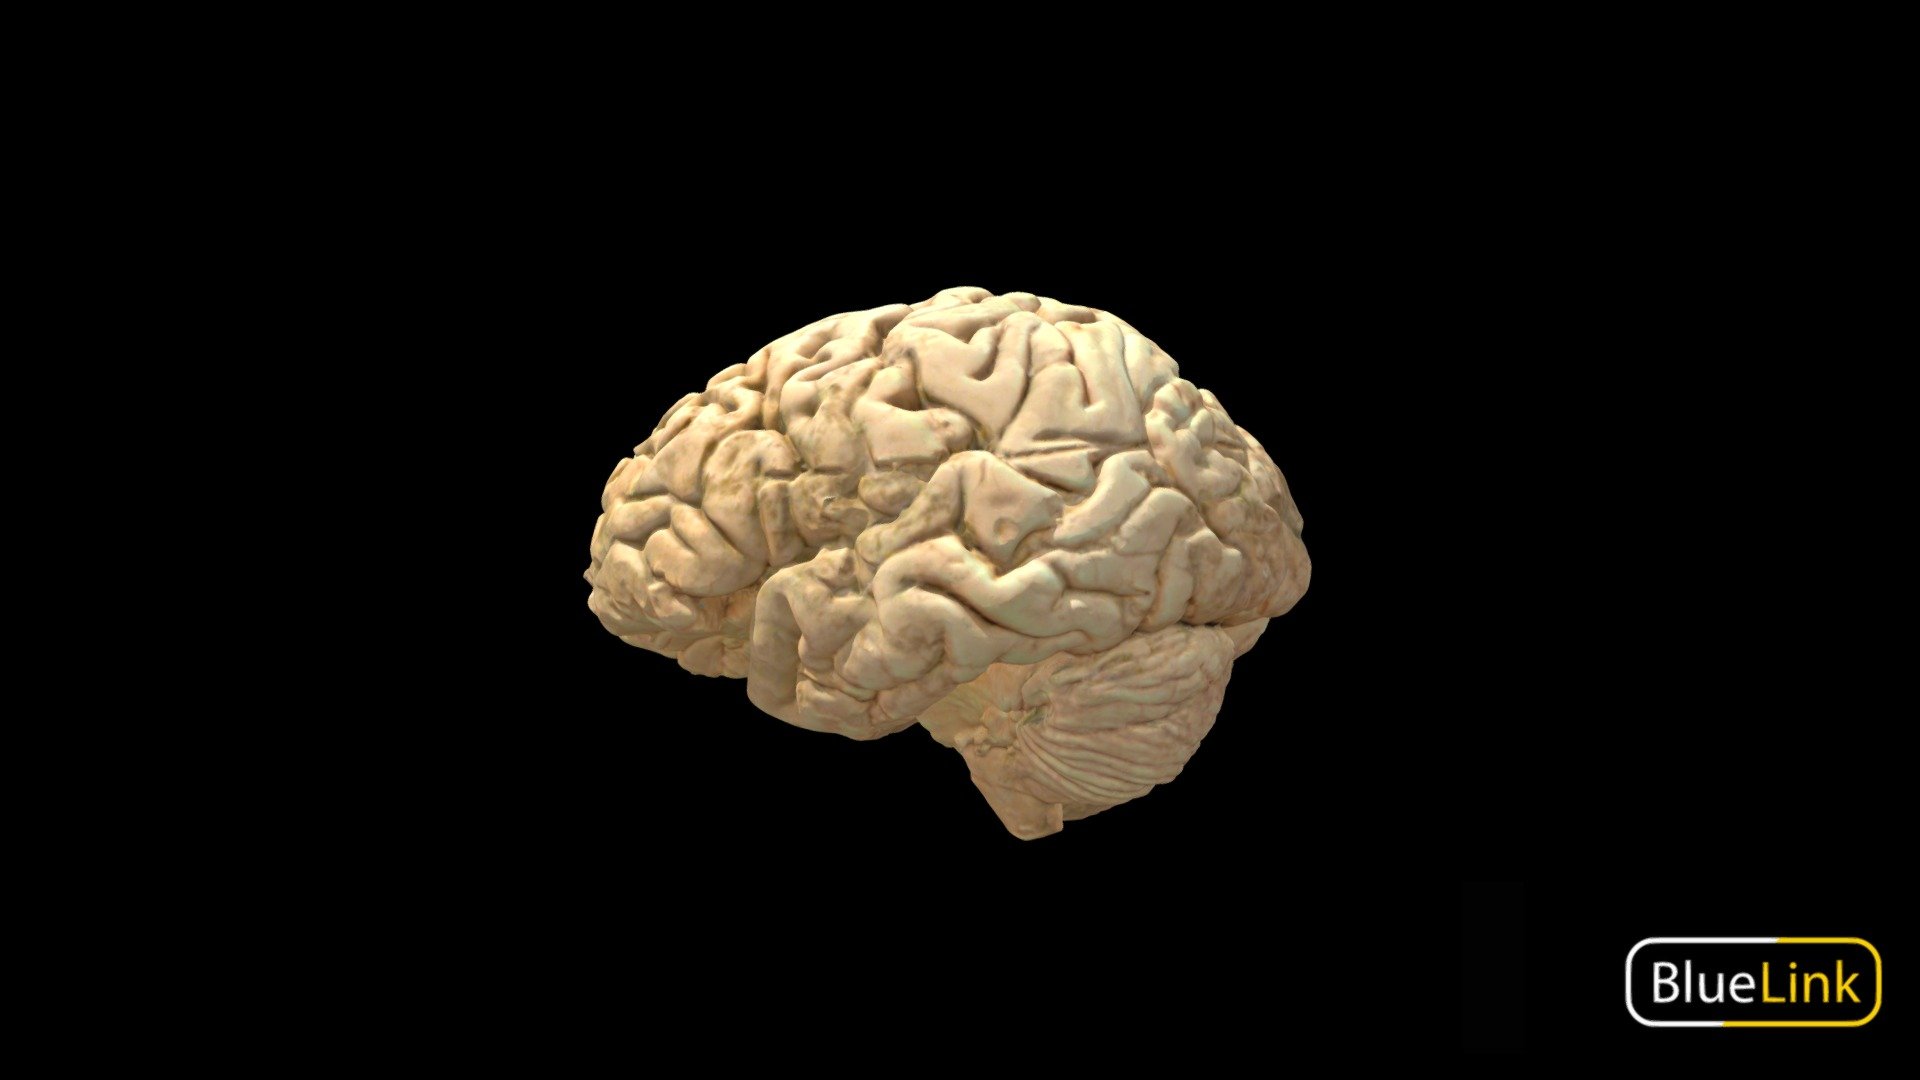 Brain - Whole, Labeled - Download Free 3D model by Bluelink Anatomy